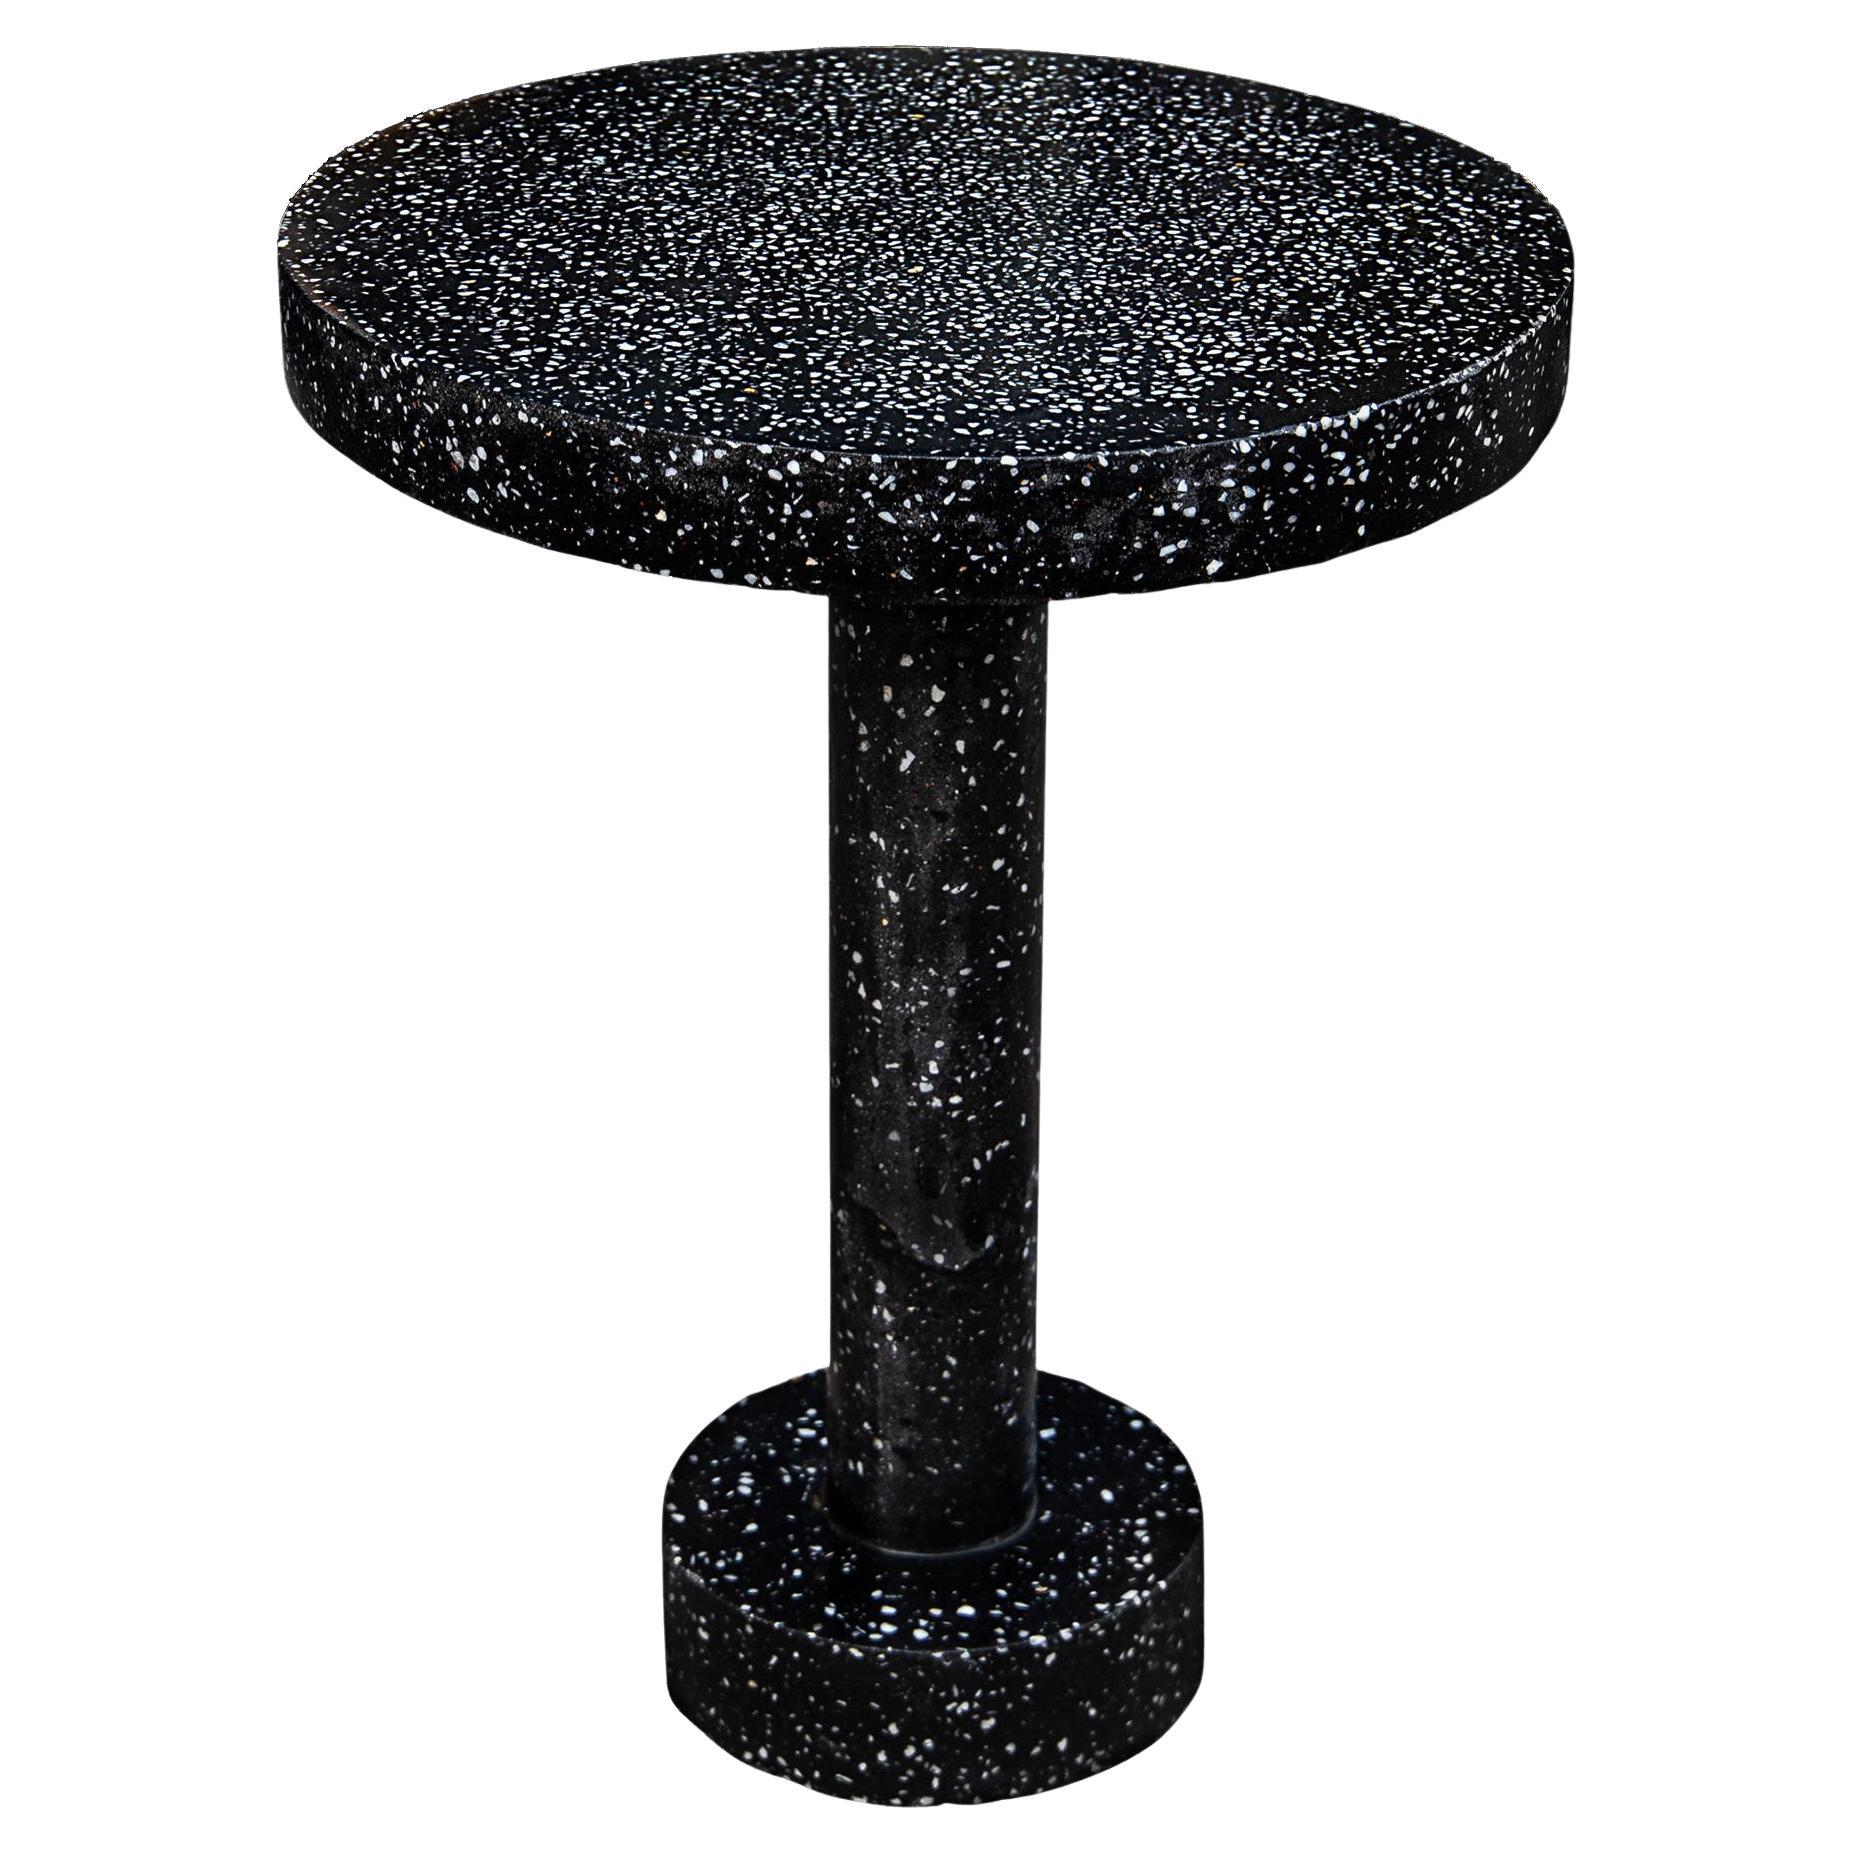 Bespoke Mephisto table In Portland stone and terrazzo ceramic by Toad Gallery For Sale